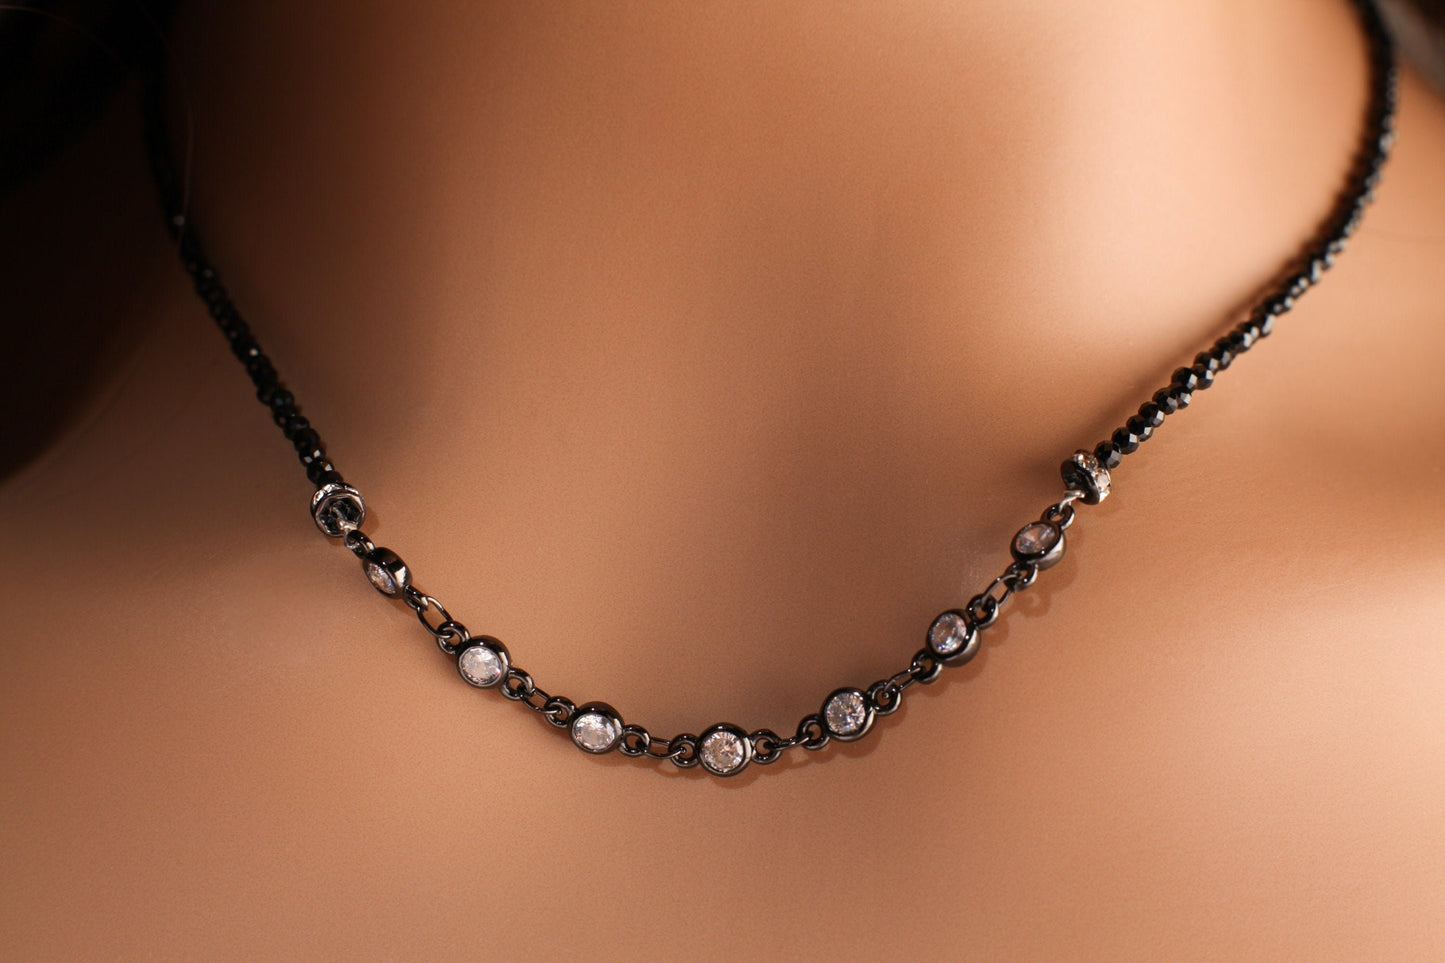 Black Spinel Diamond Cut Choker Necklace with 4mm Cubic Zirconia Disk and Rhinestone Spacers Necklace